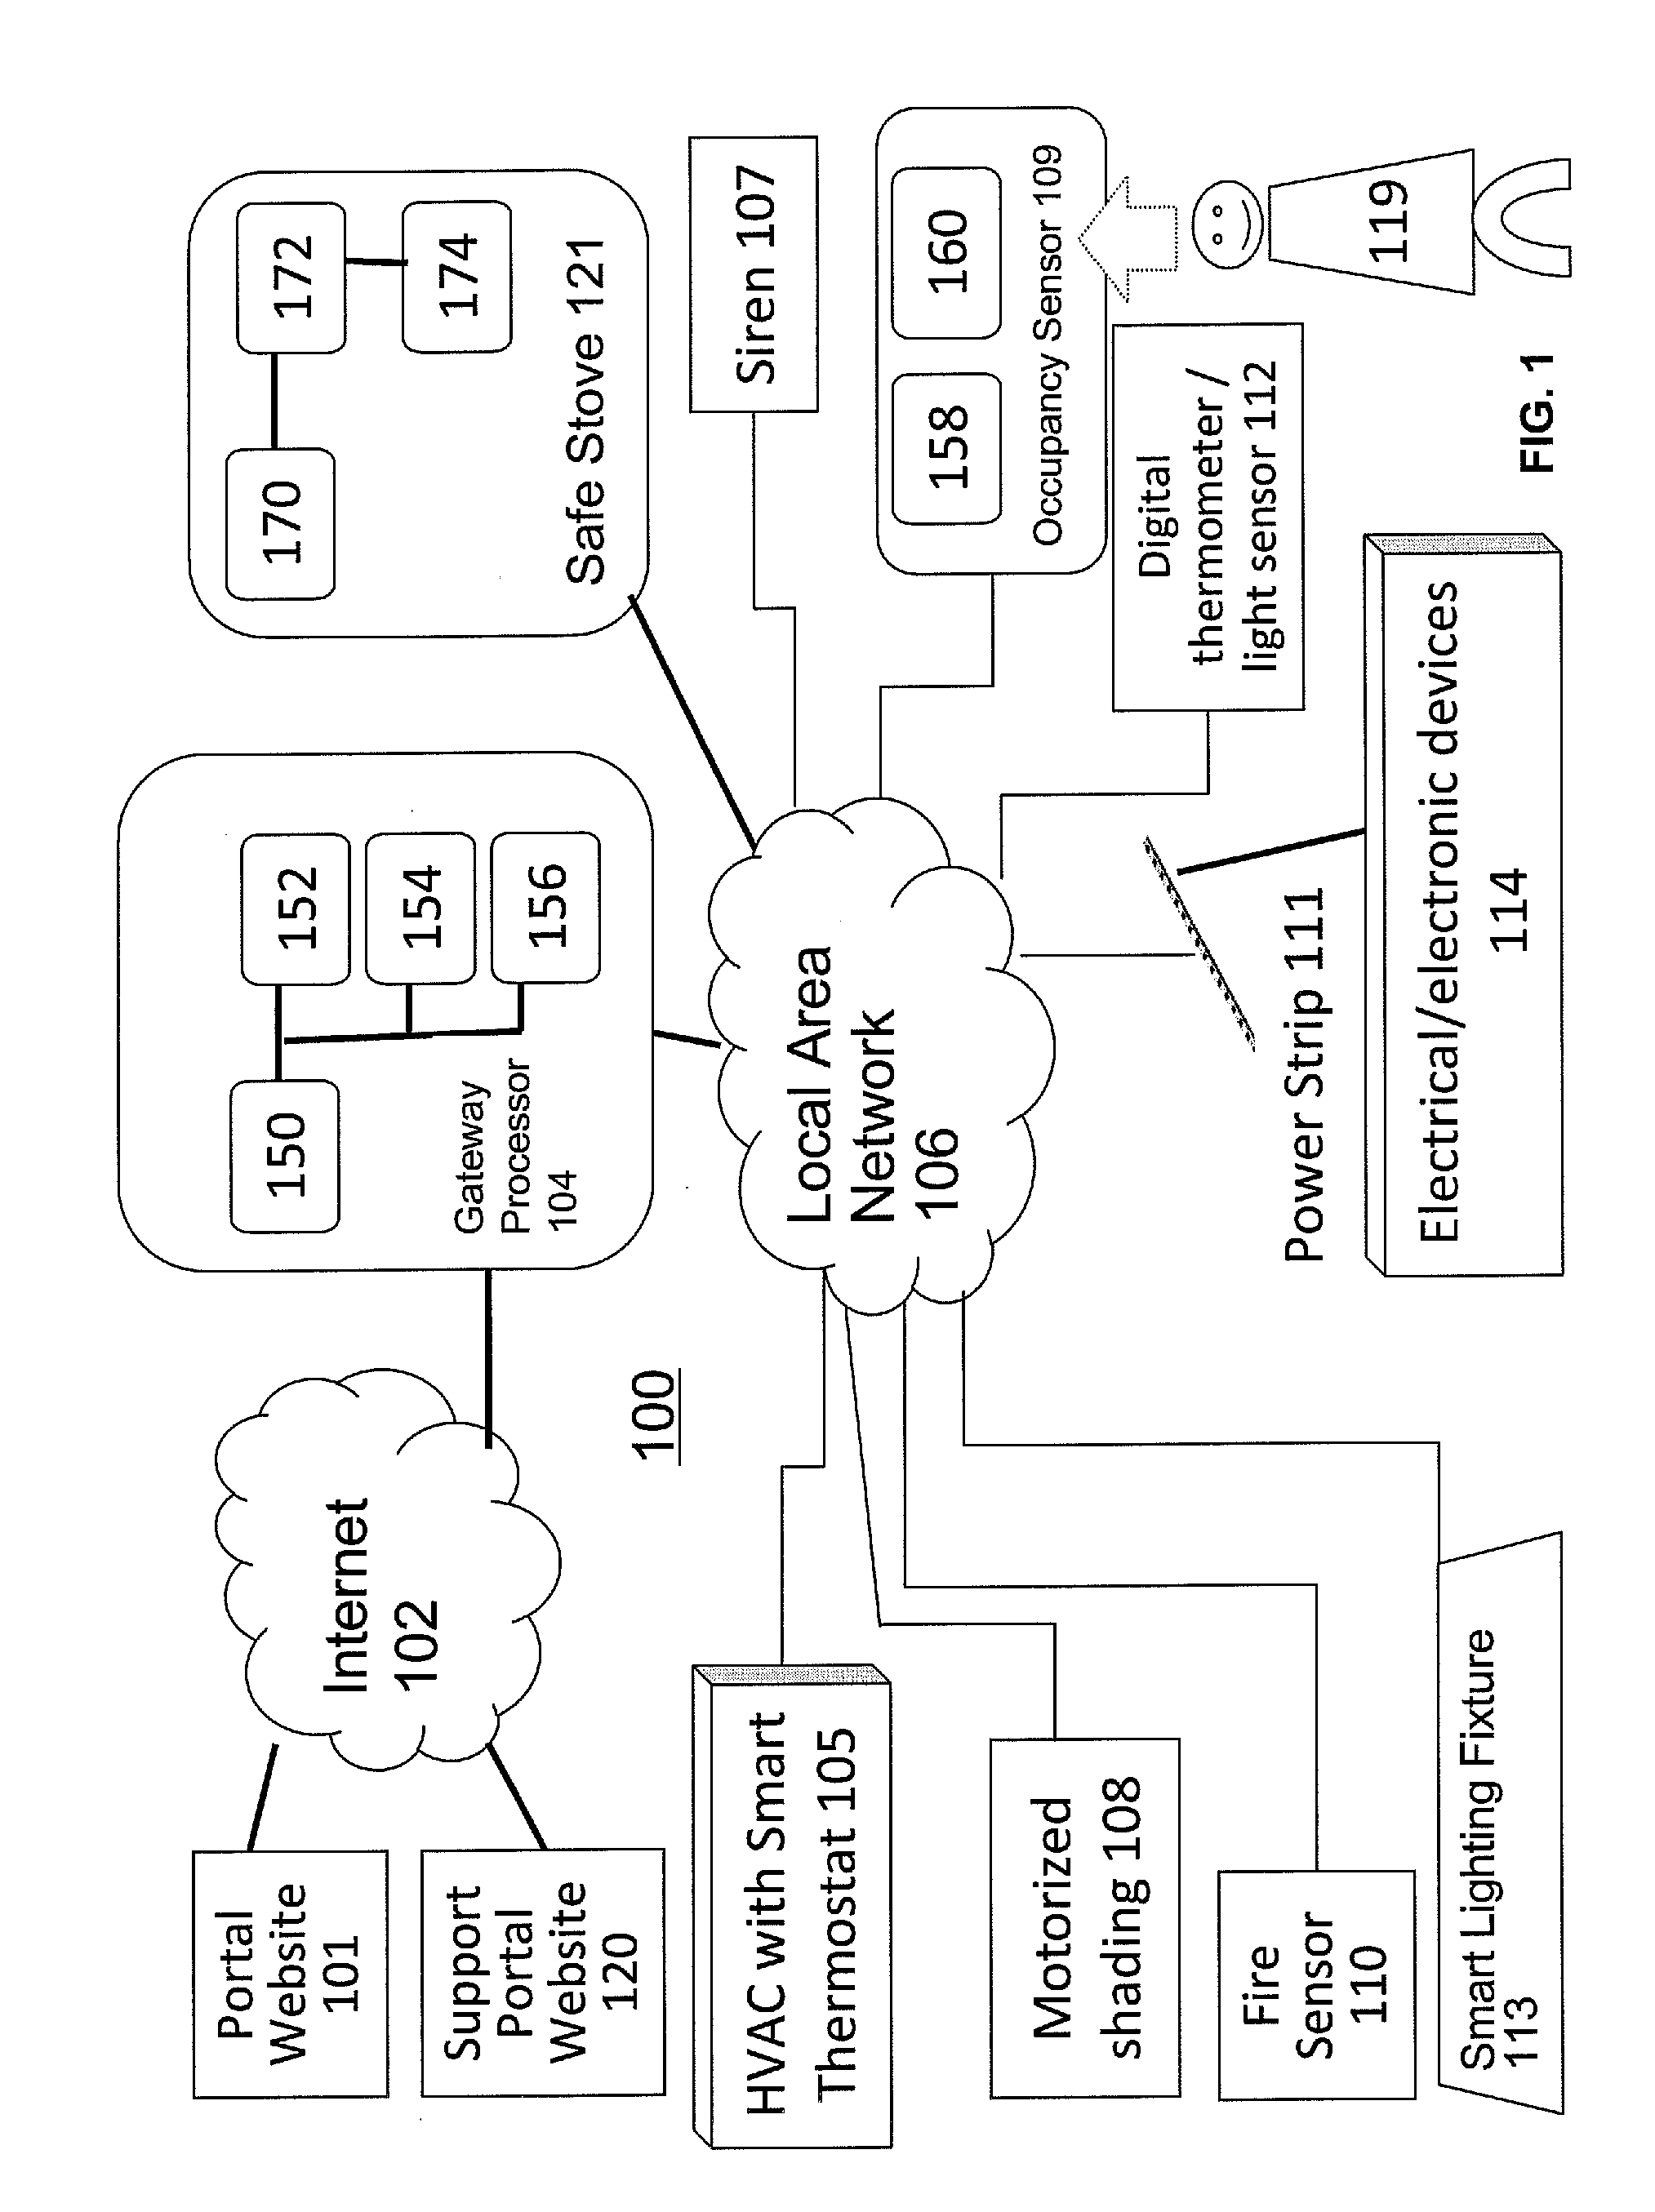 Systems, devices and methods of energy management, property security and fire hazard prevention